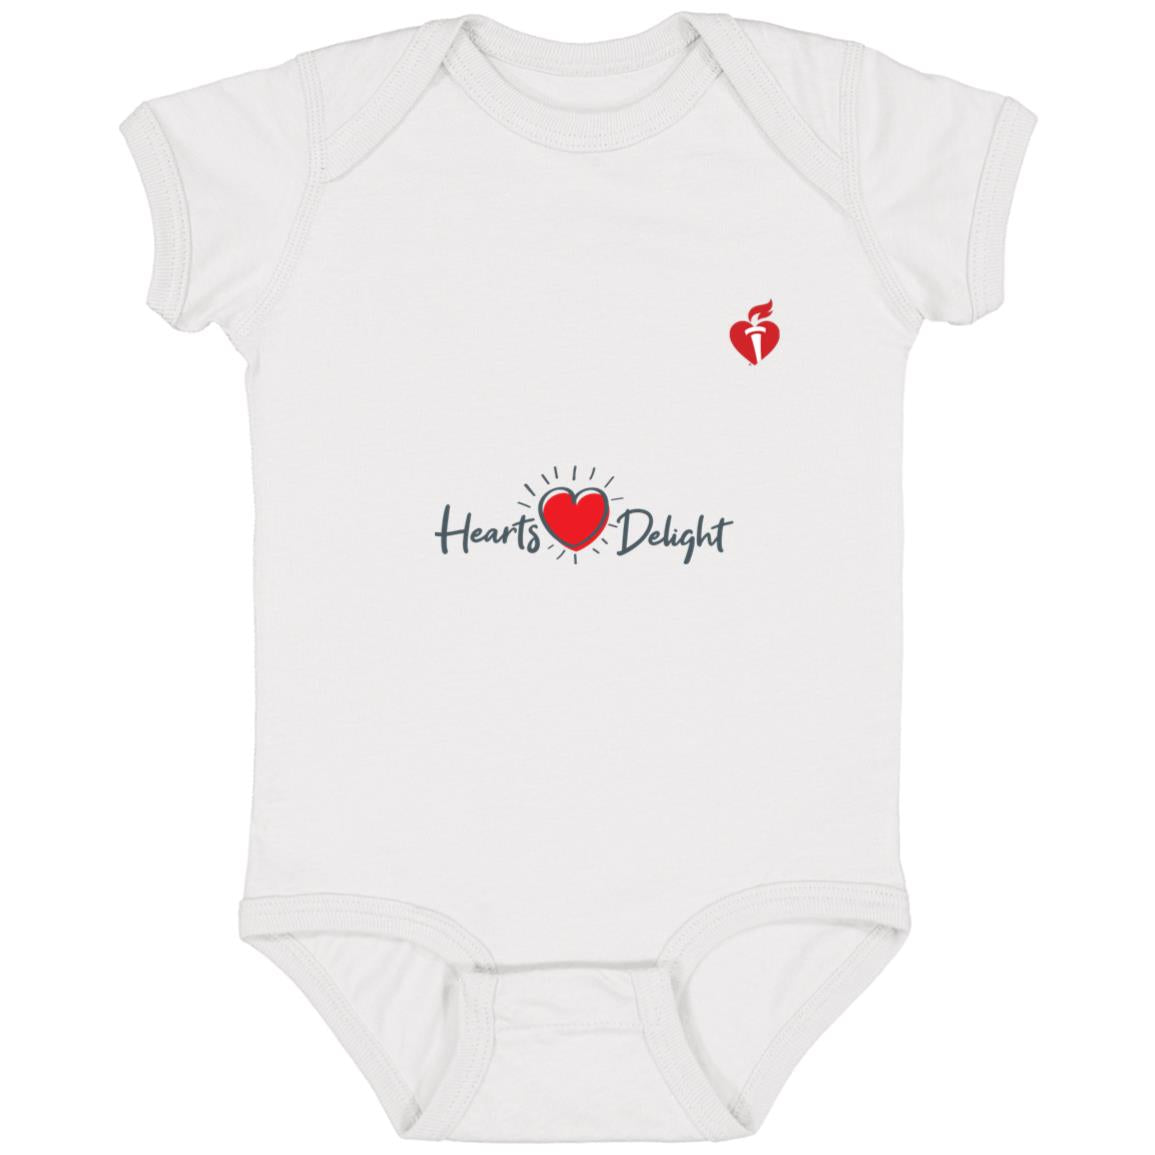 baby bodysuit that says "Hearts Delight" and has AHA heart and torch on chest